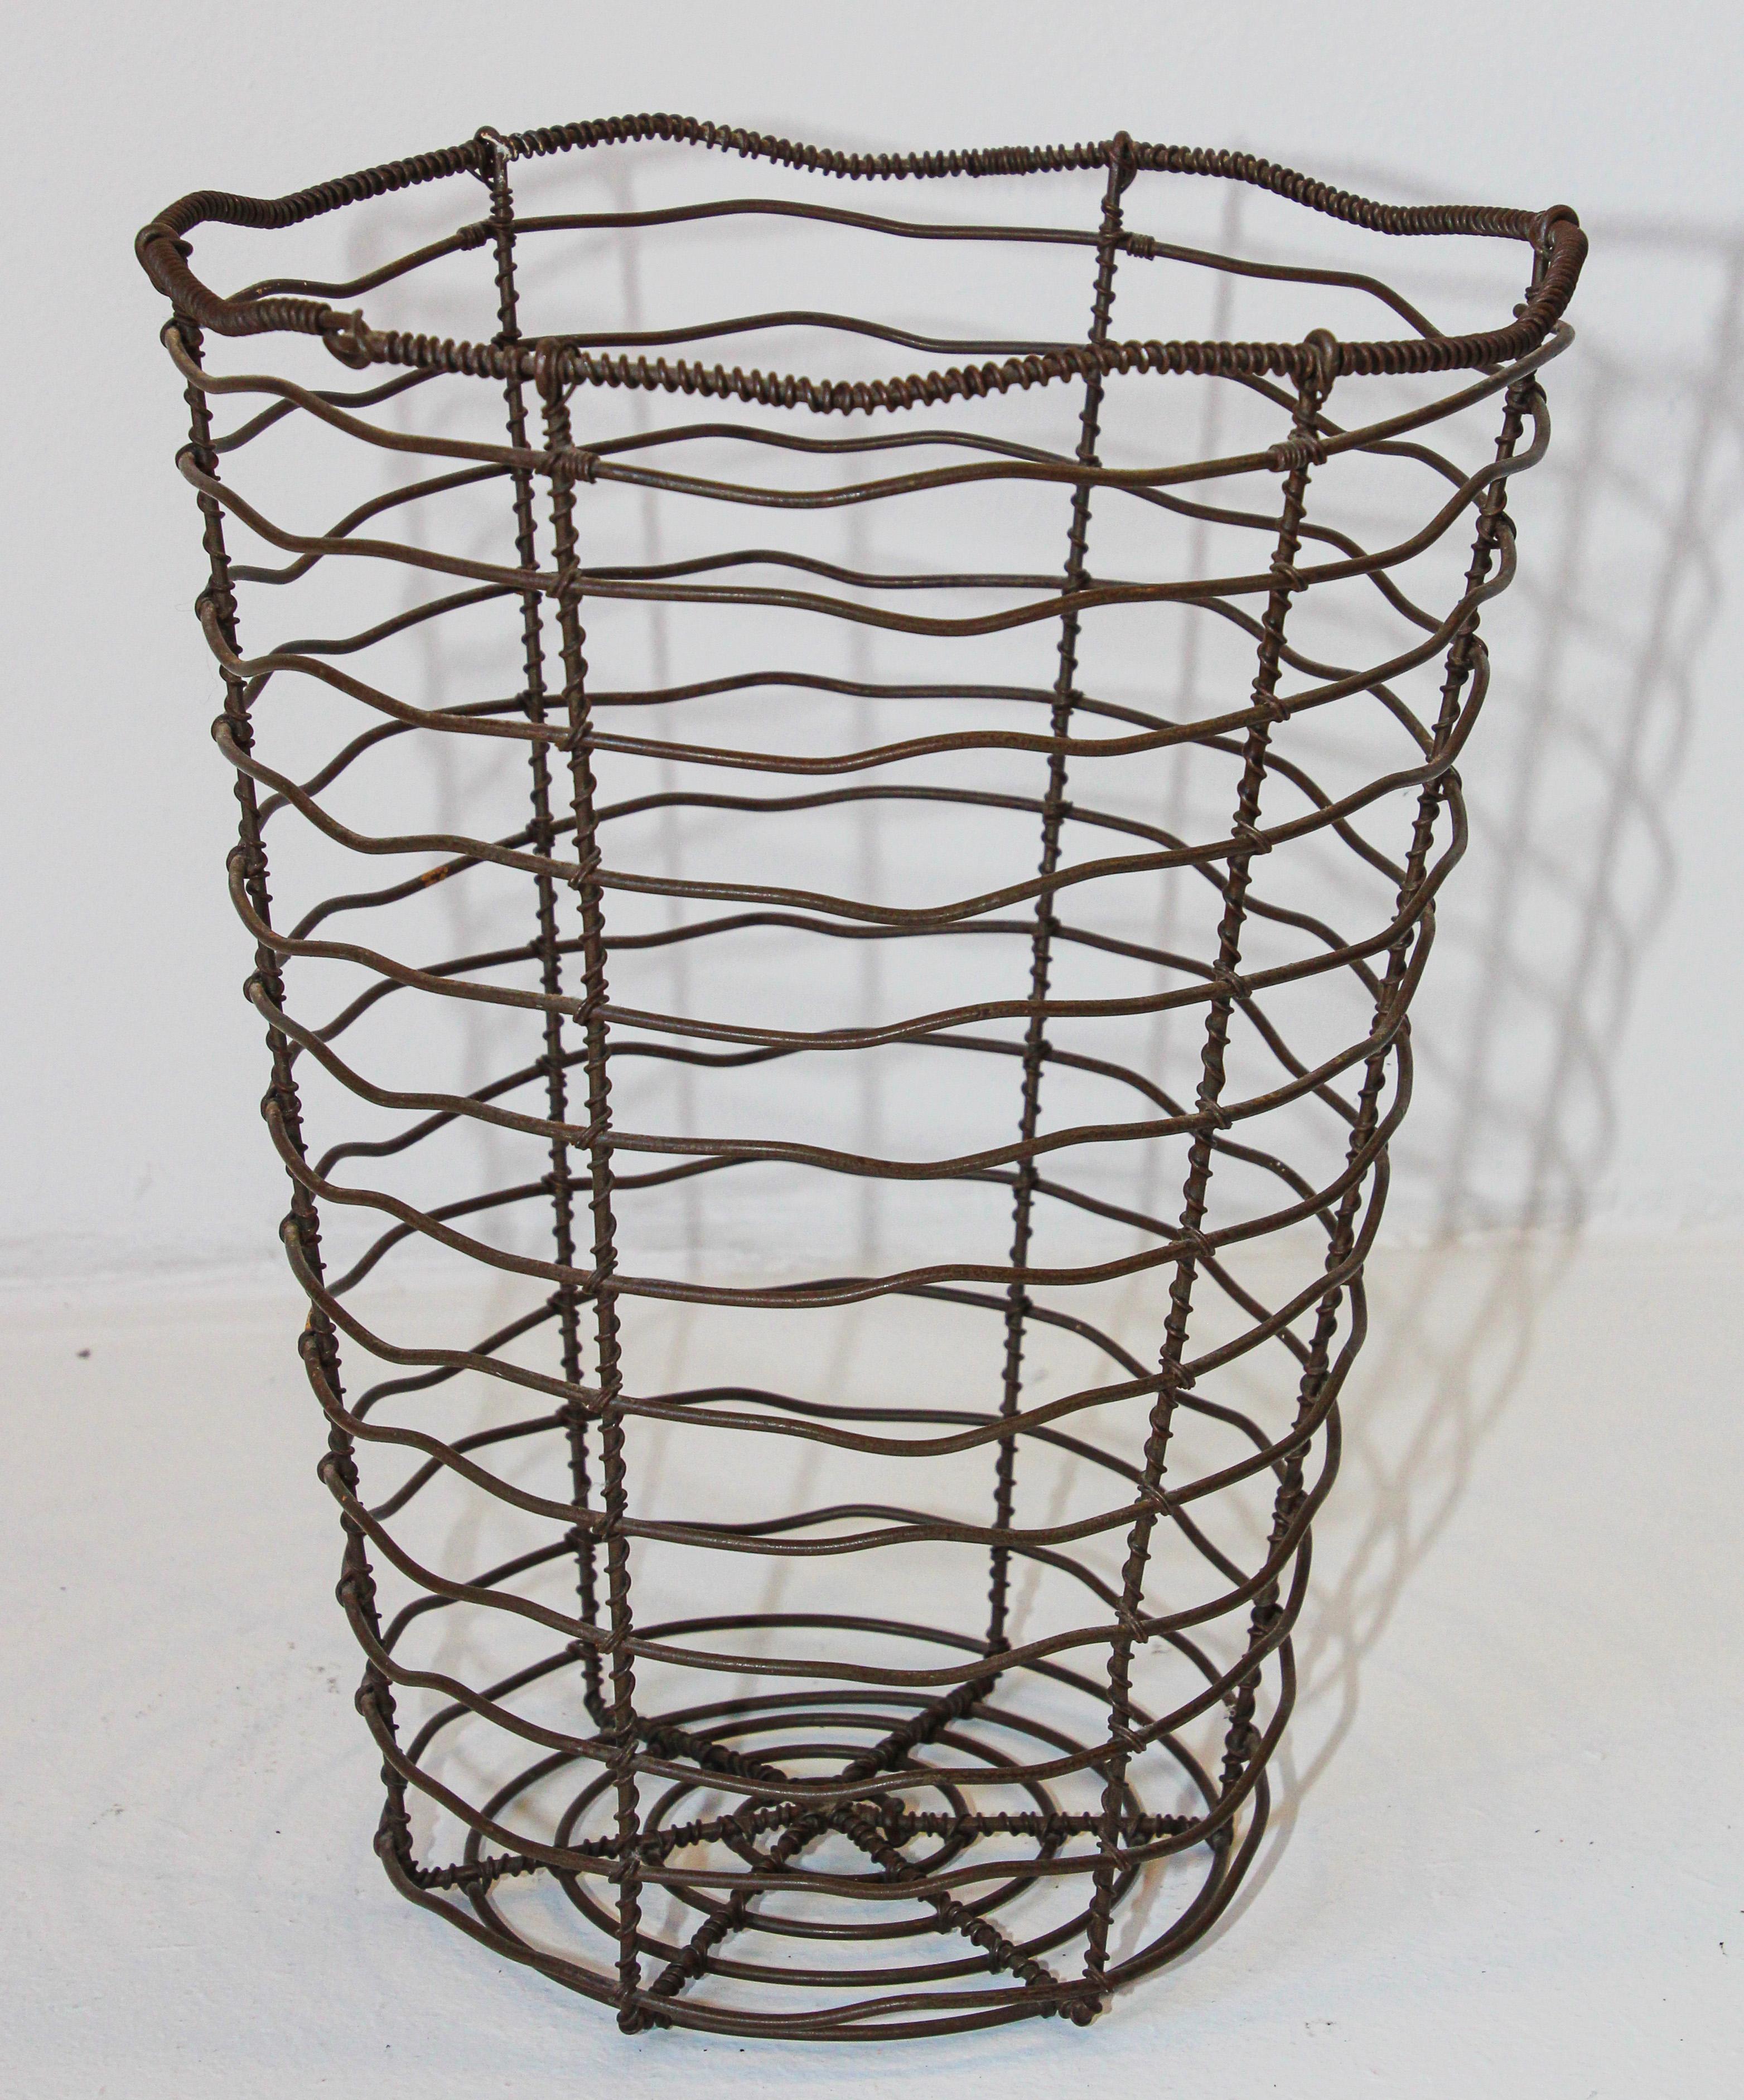 Vintage industrial inspired wire basket. 
Handcrafted from galvanized steel Inspired by the baskets originally used by farmers and fishermen.
Industrial design inspired by vintage Swedish Korbo baskets.
Made from galvanized steel to withstand